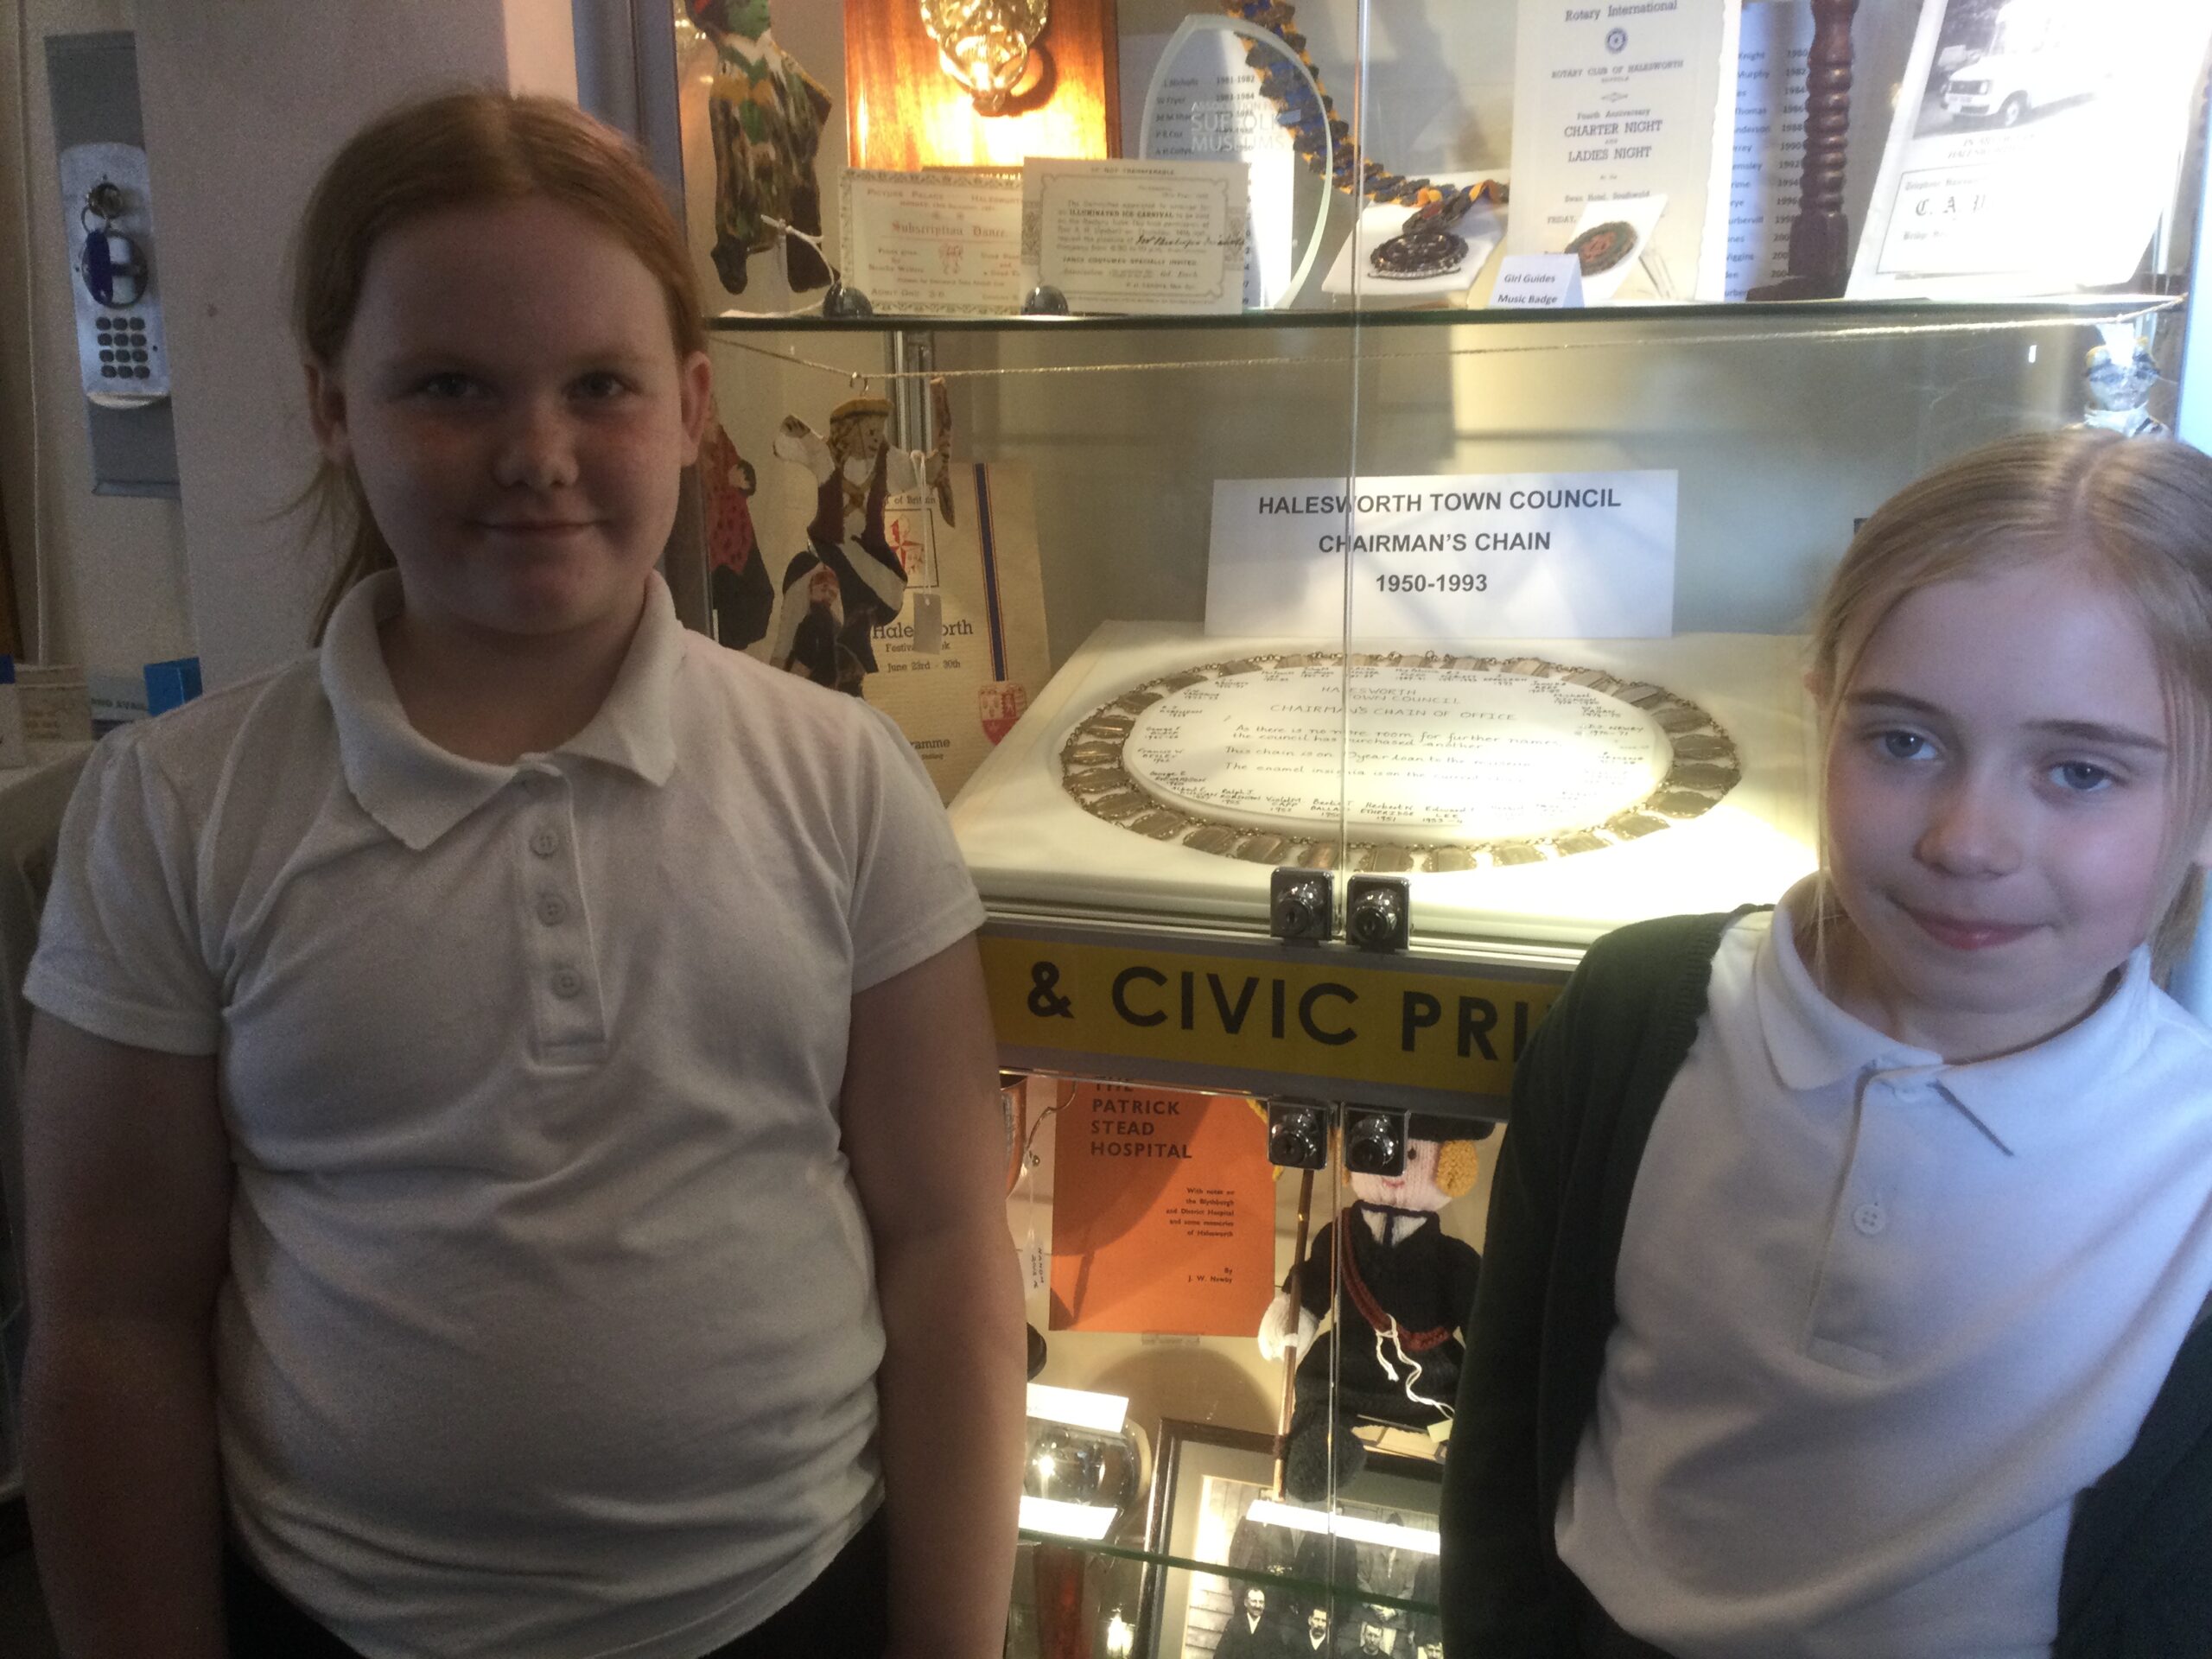 Two school girls stand in front of a display case showing the Halesworth Town Council Chairman's chain 1950 to 1993